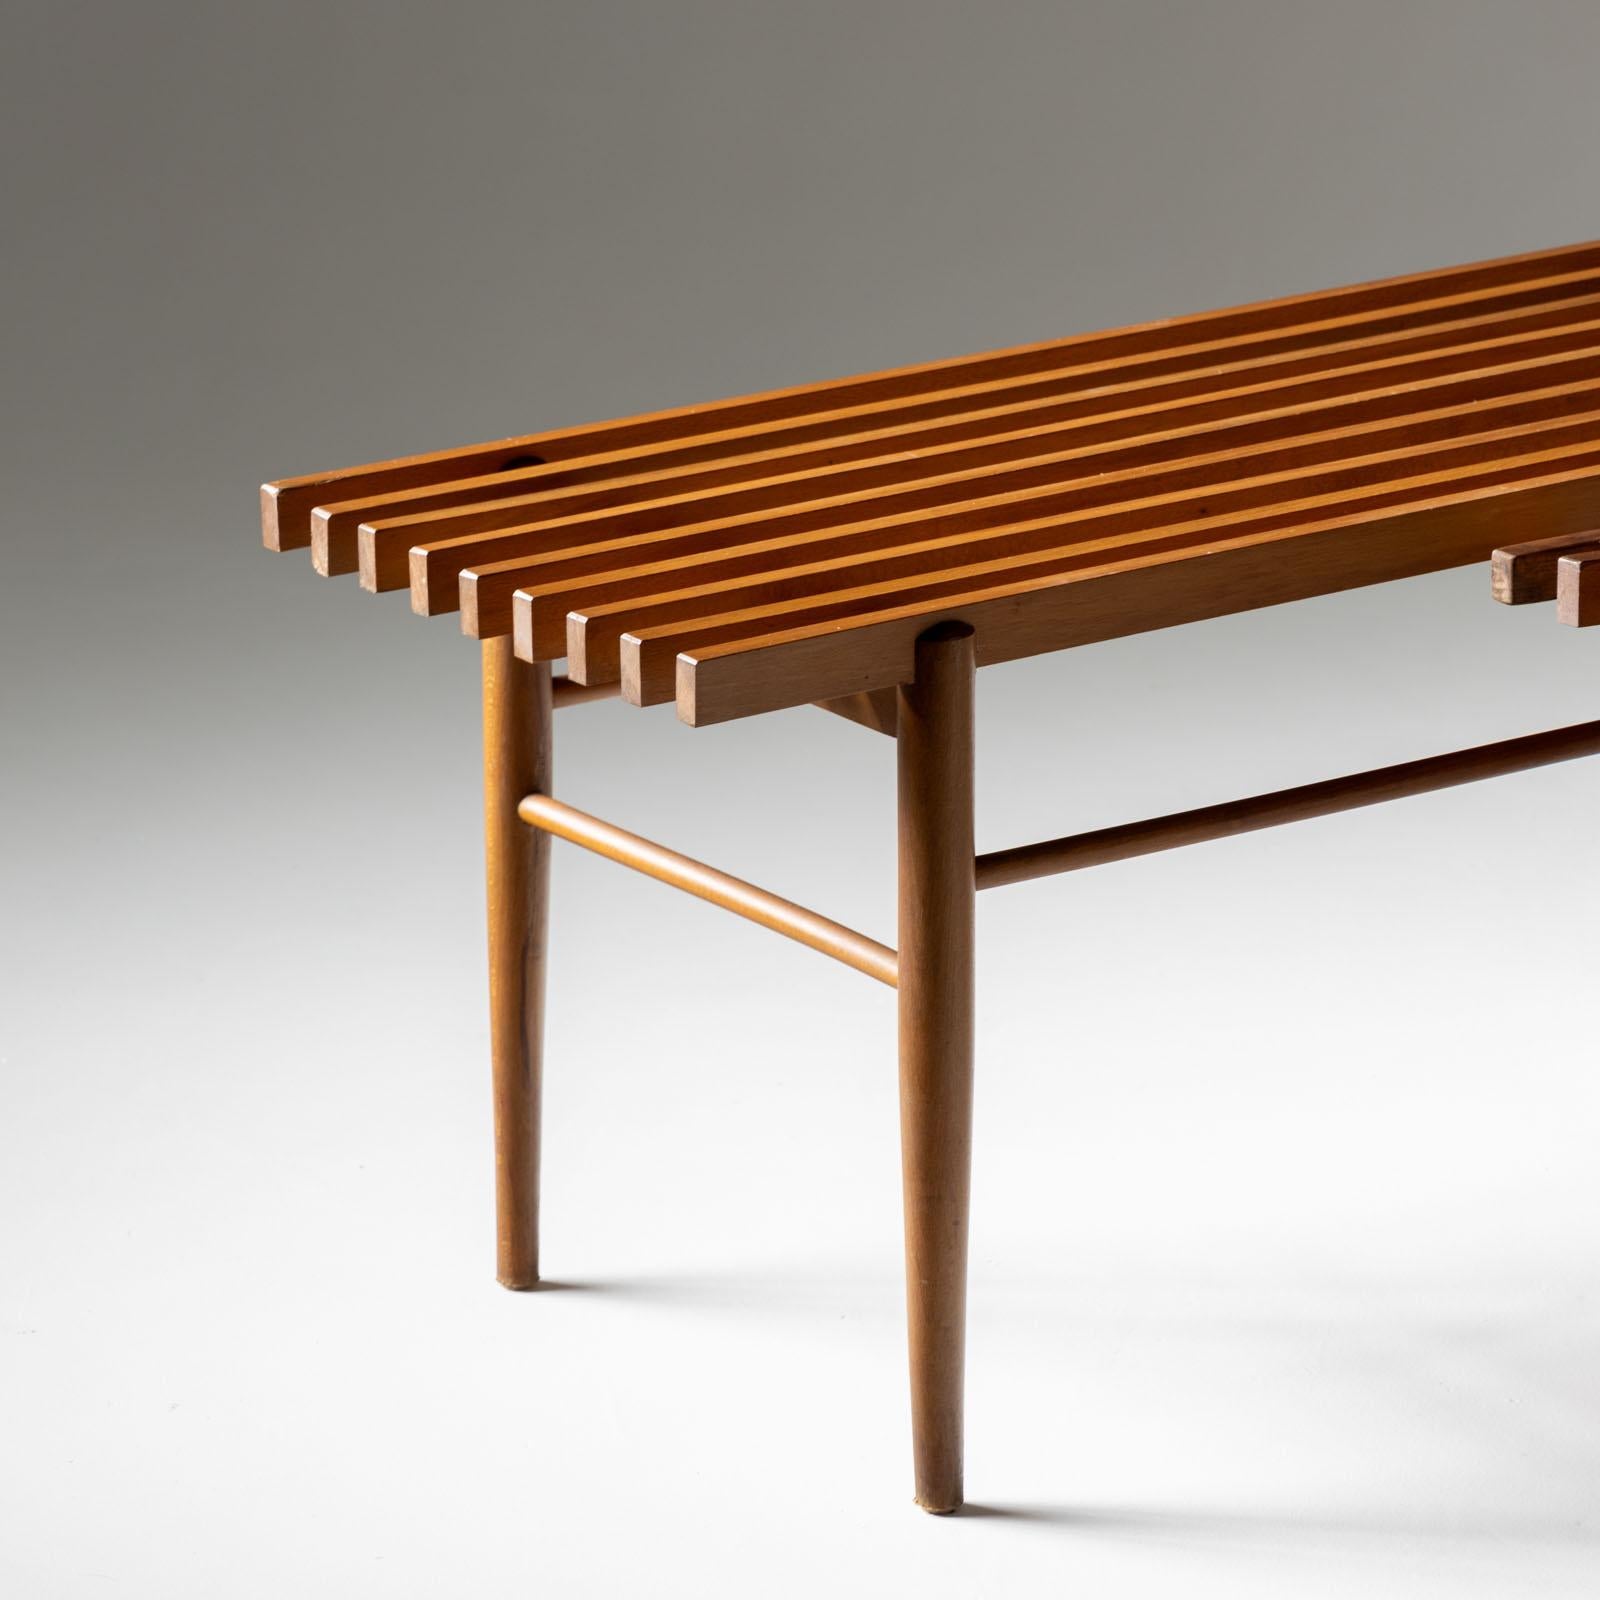 Modern Slatted Wooden Benches, Italy Mid-20th Century For Sale